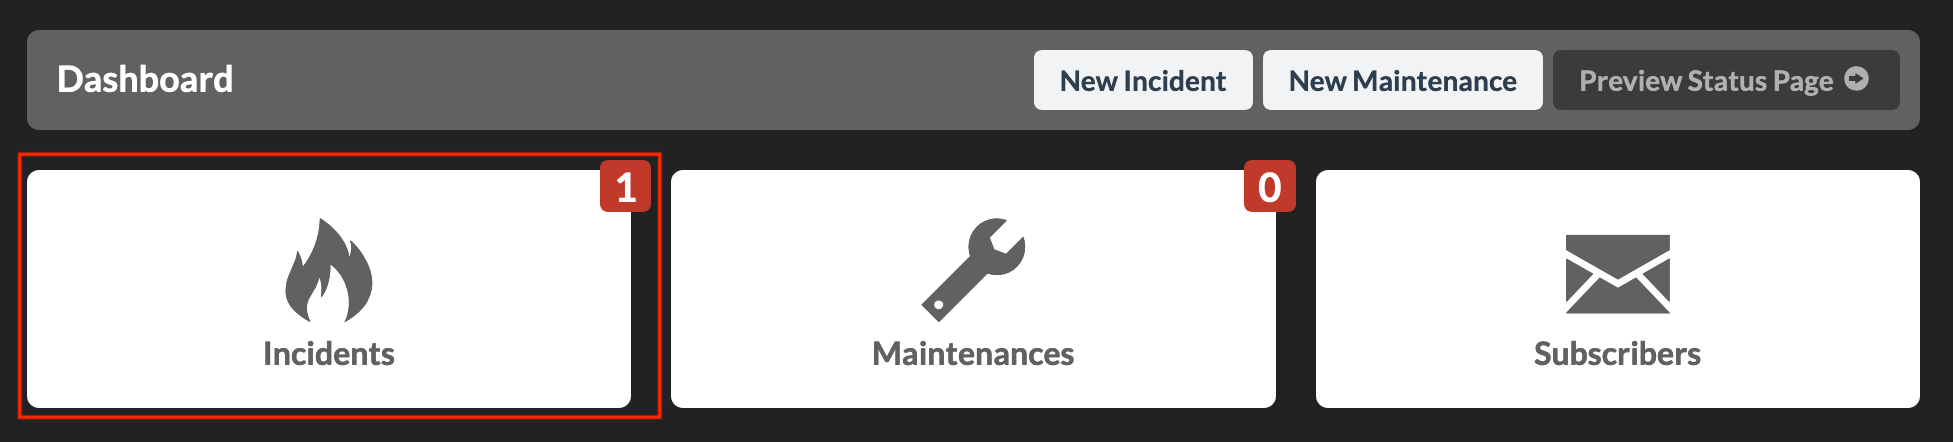 Active incident dashboard icon